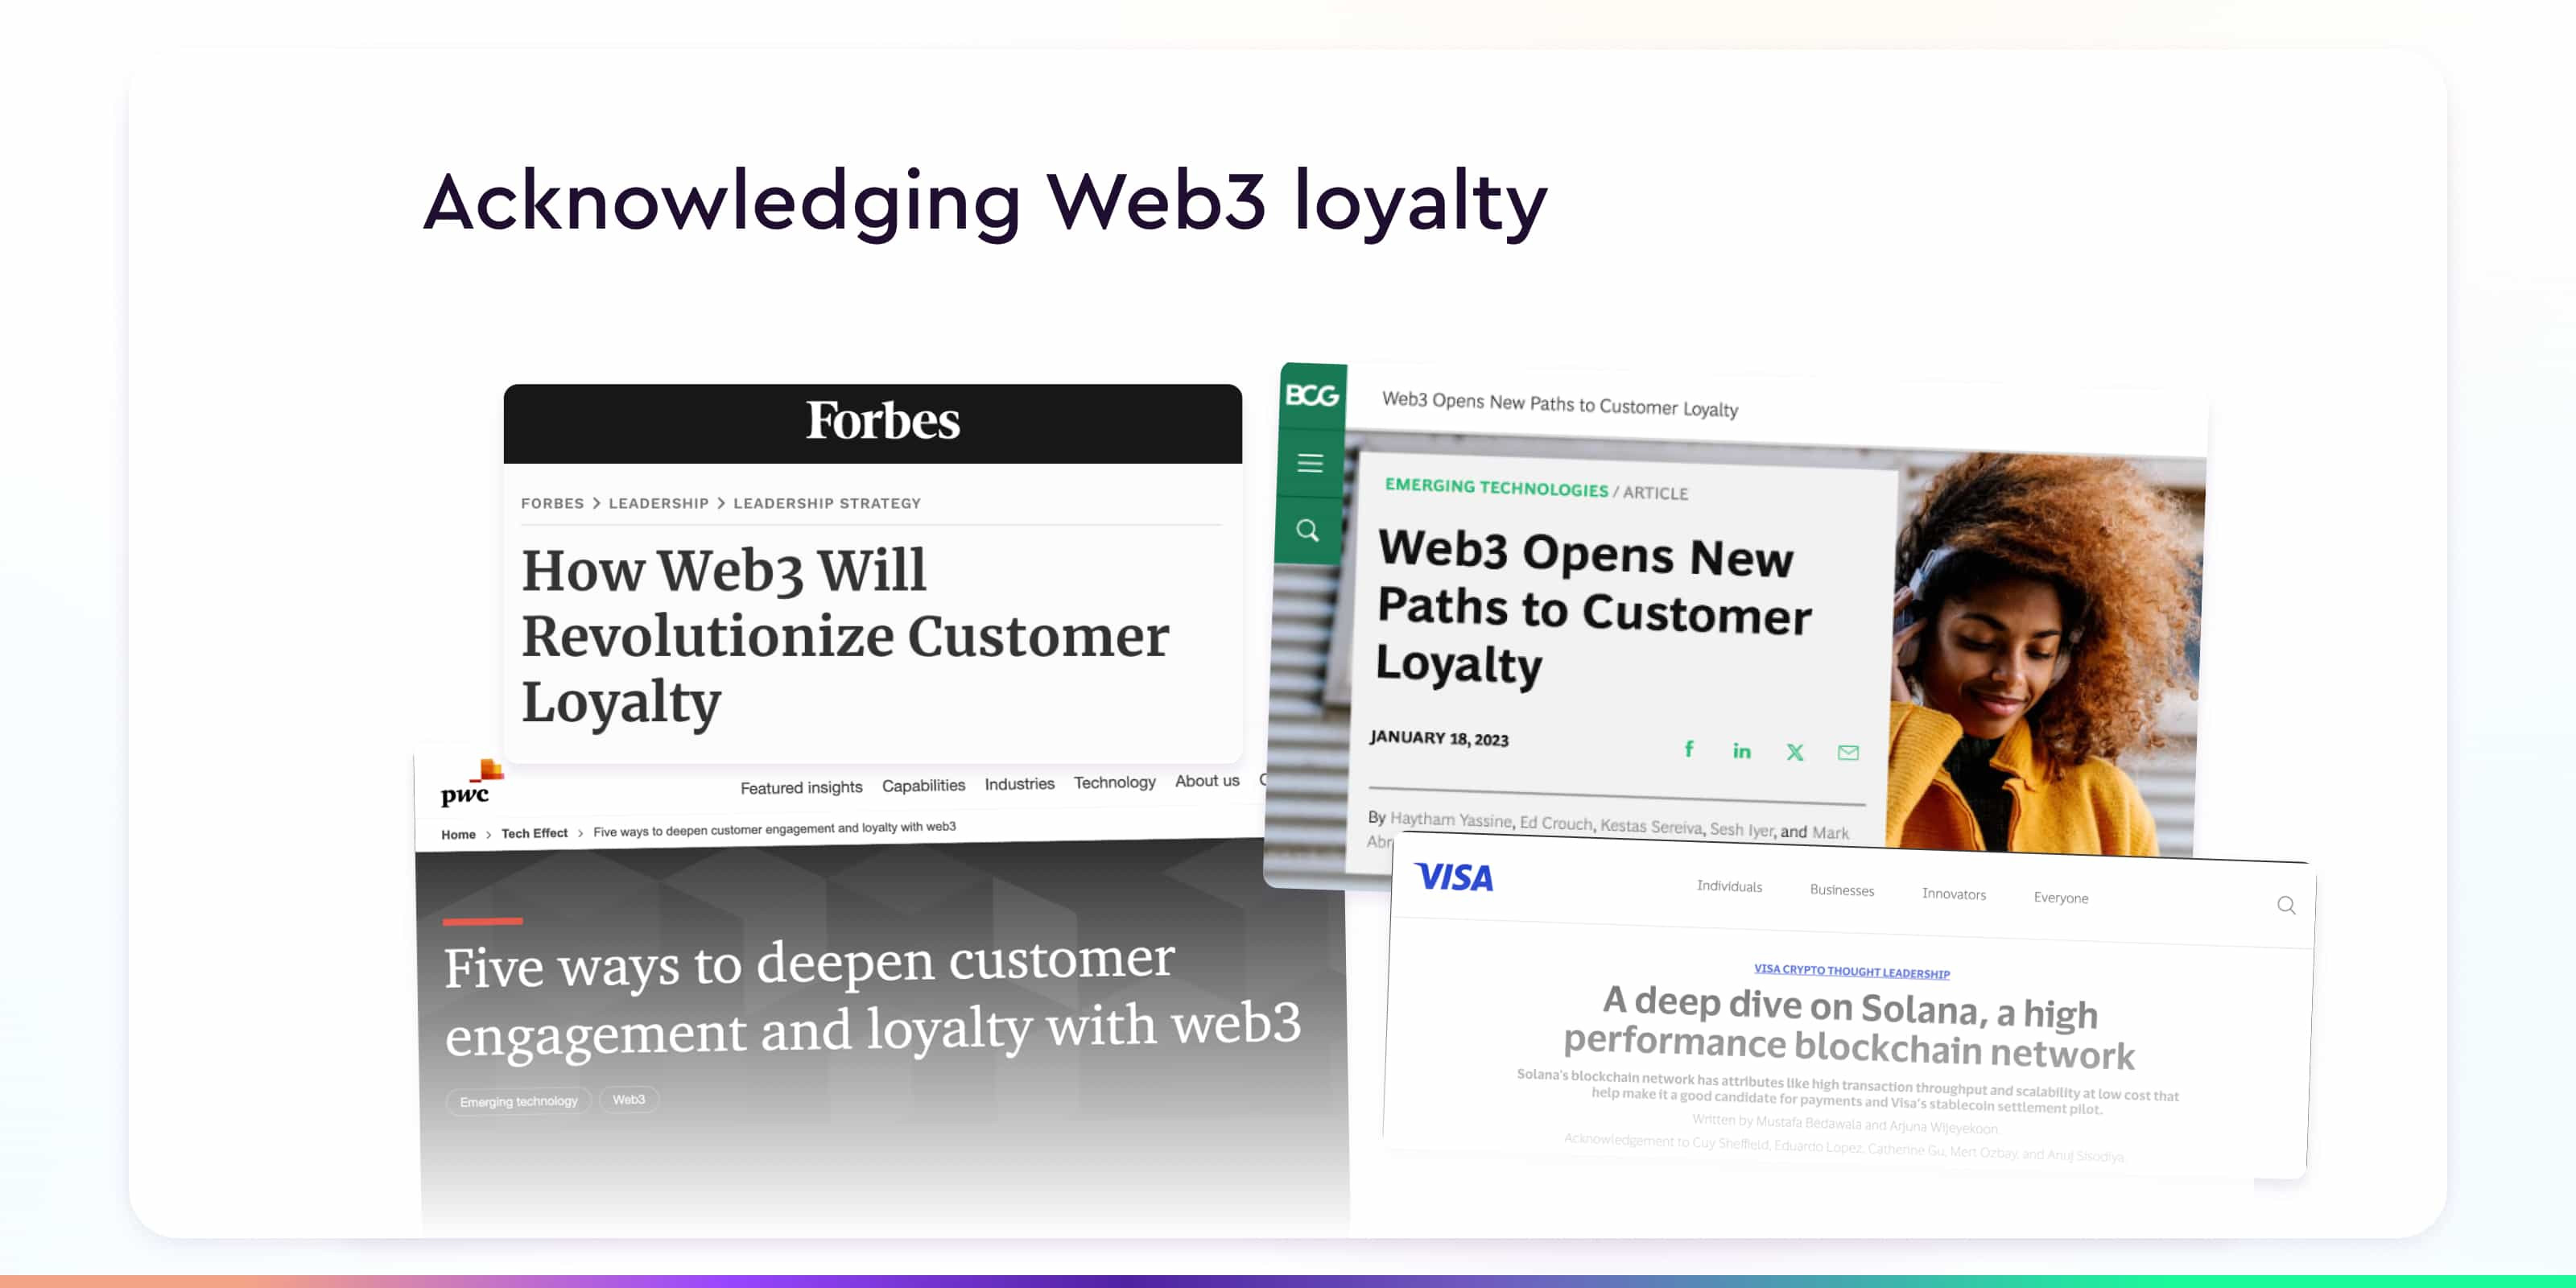 Web3 for Customer Loyalty get acknowledgement by industry leaders